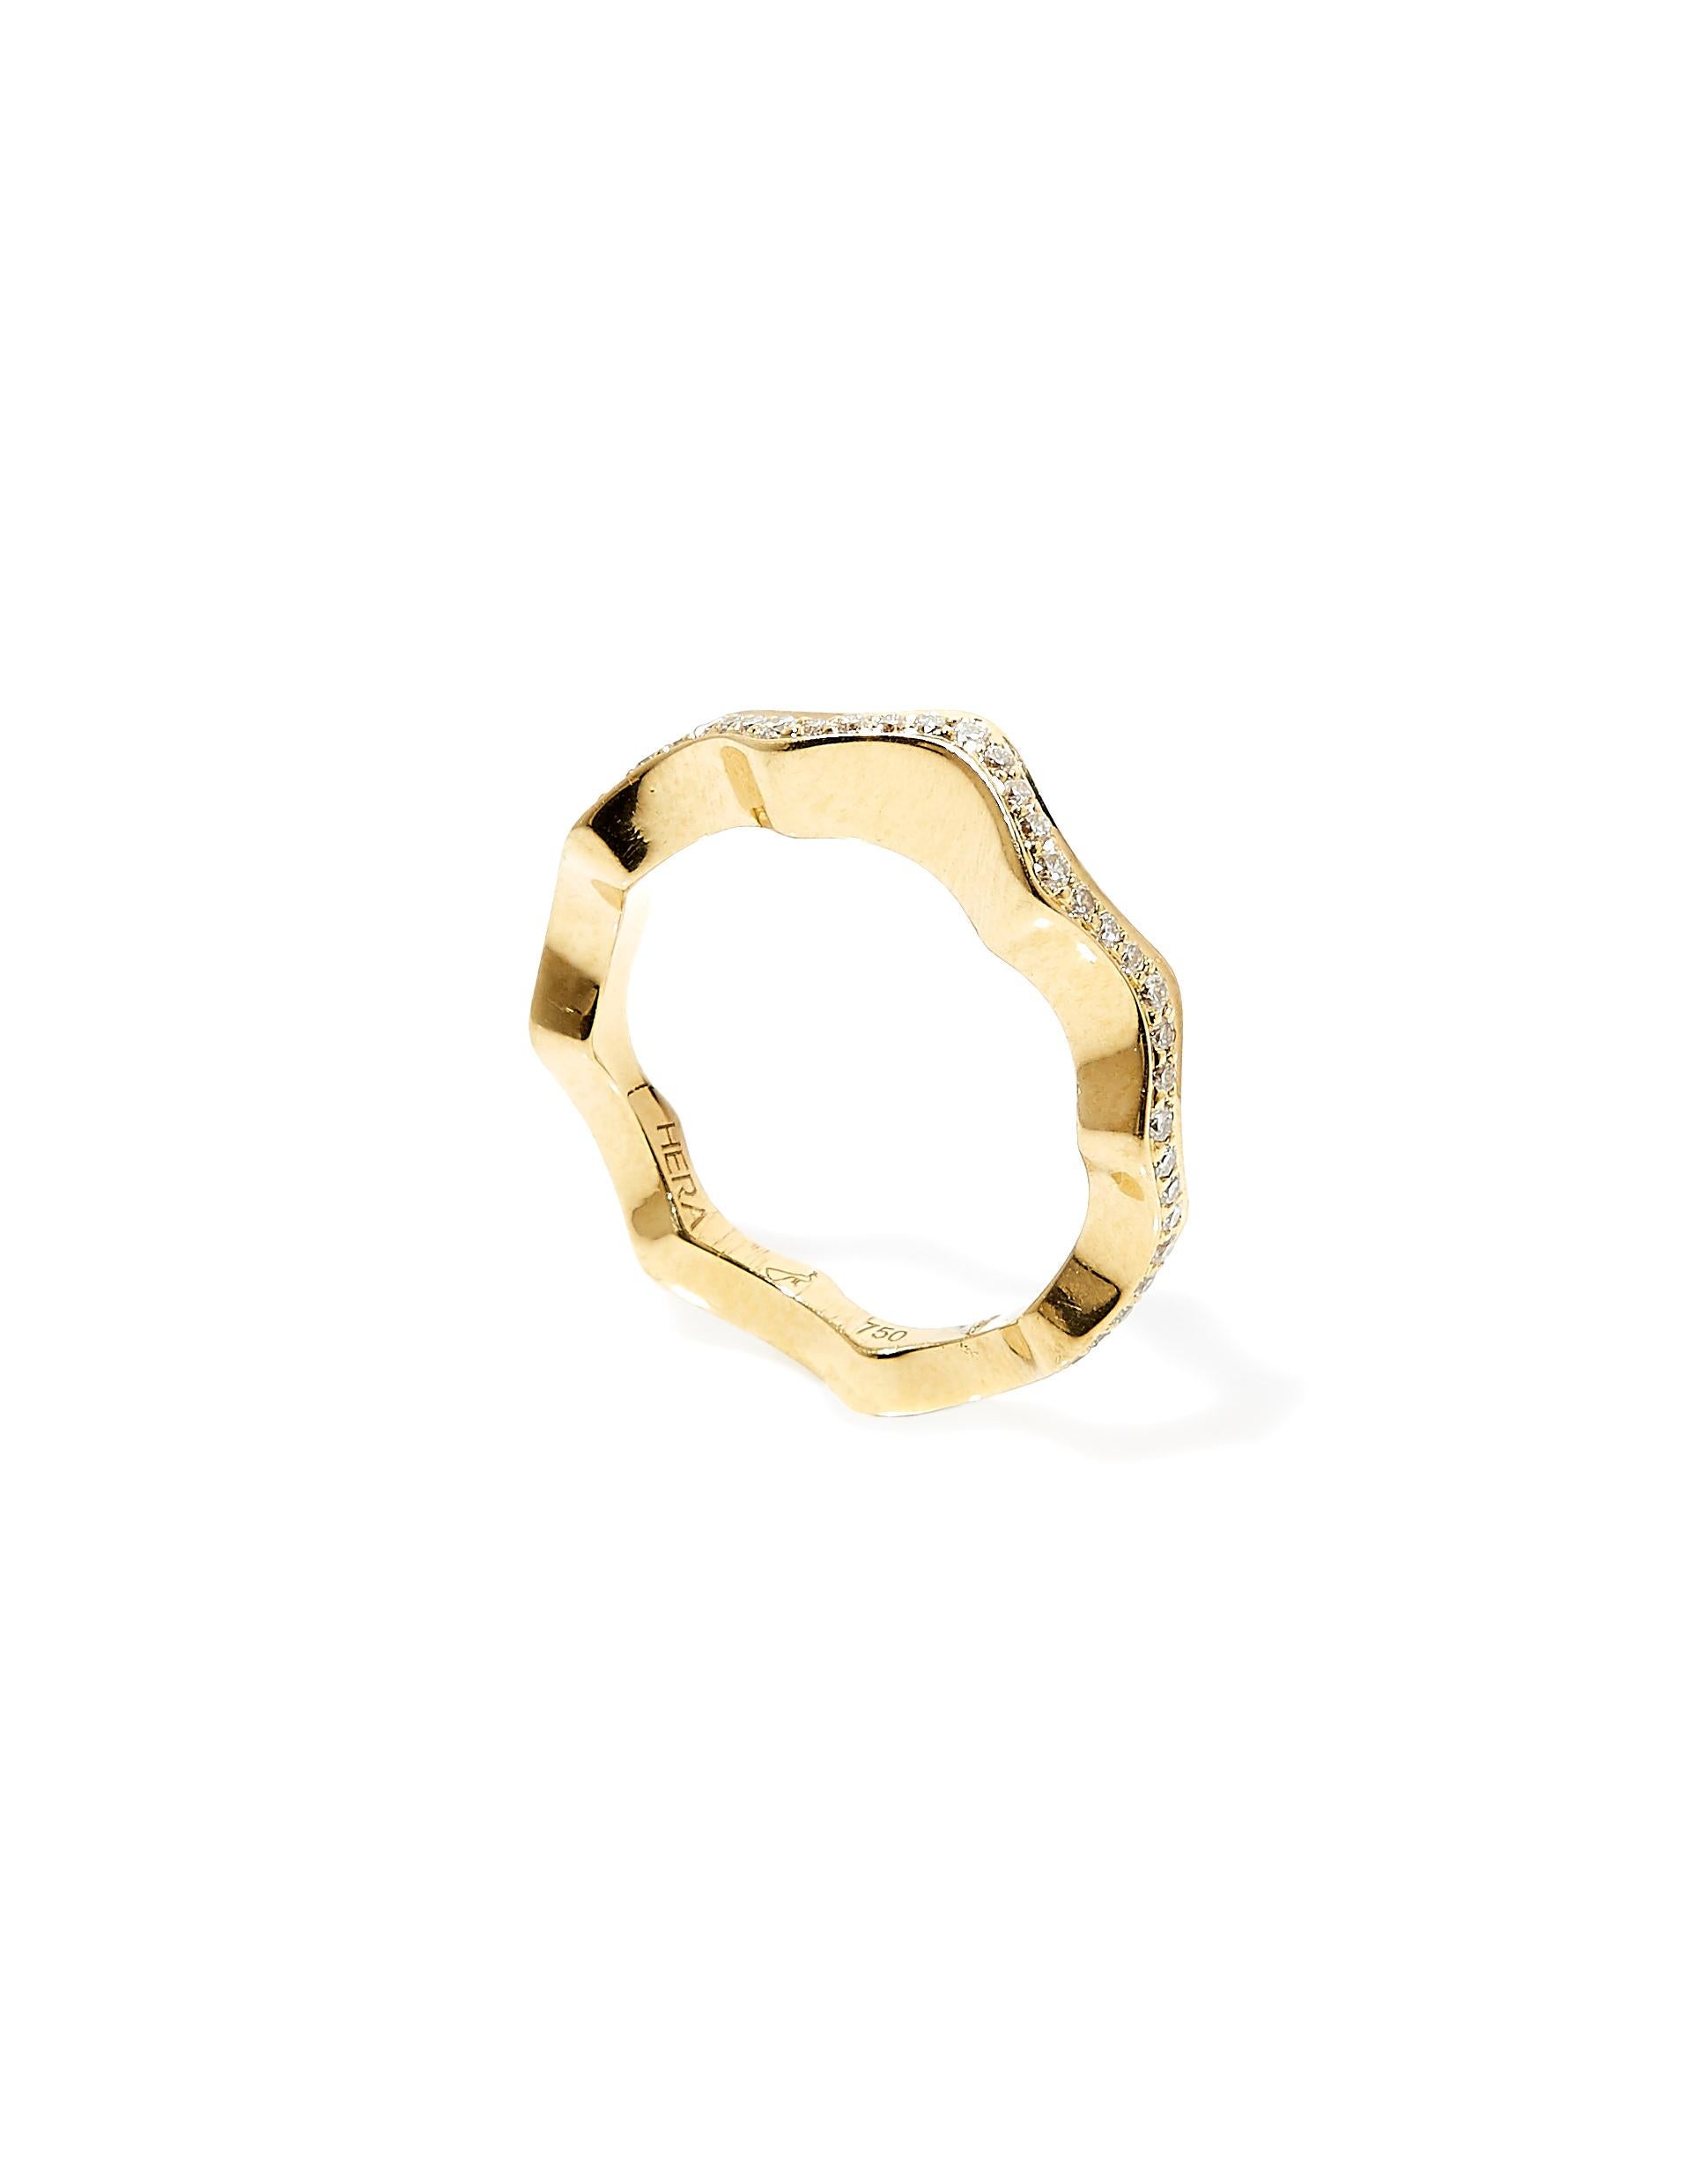 Contemporary 18 Karat Yellow Gold Wedding Ring Set With a Row of 0.47 Carat White Diamonds  For Sale